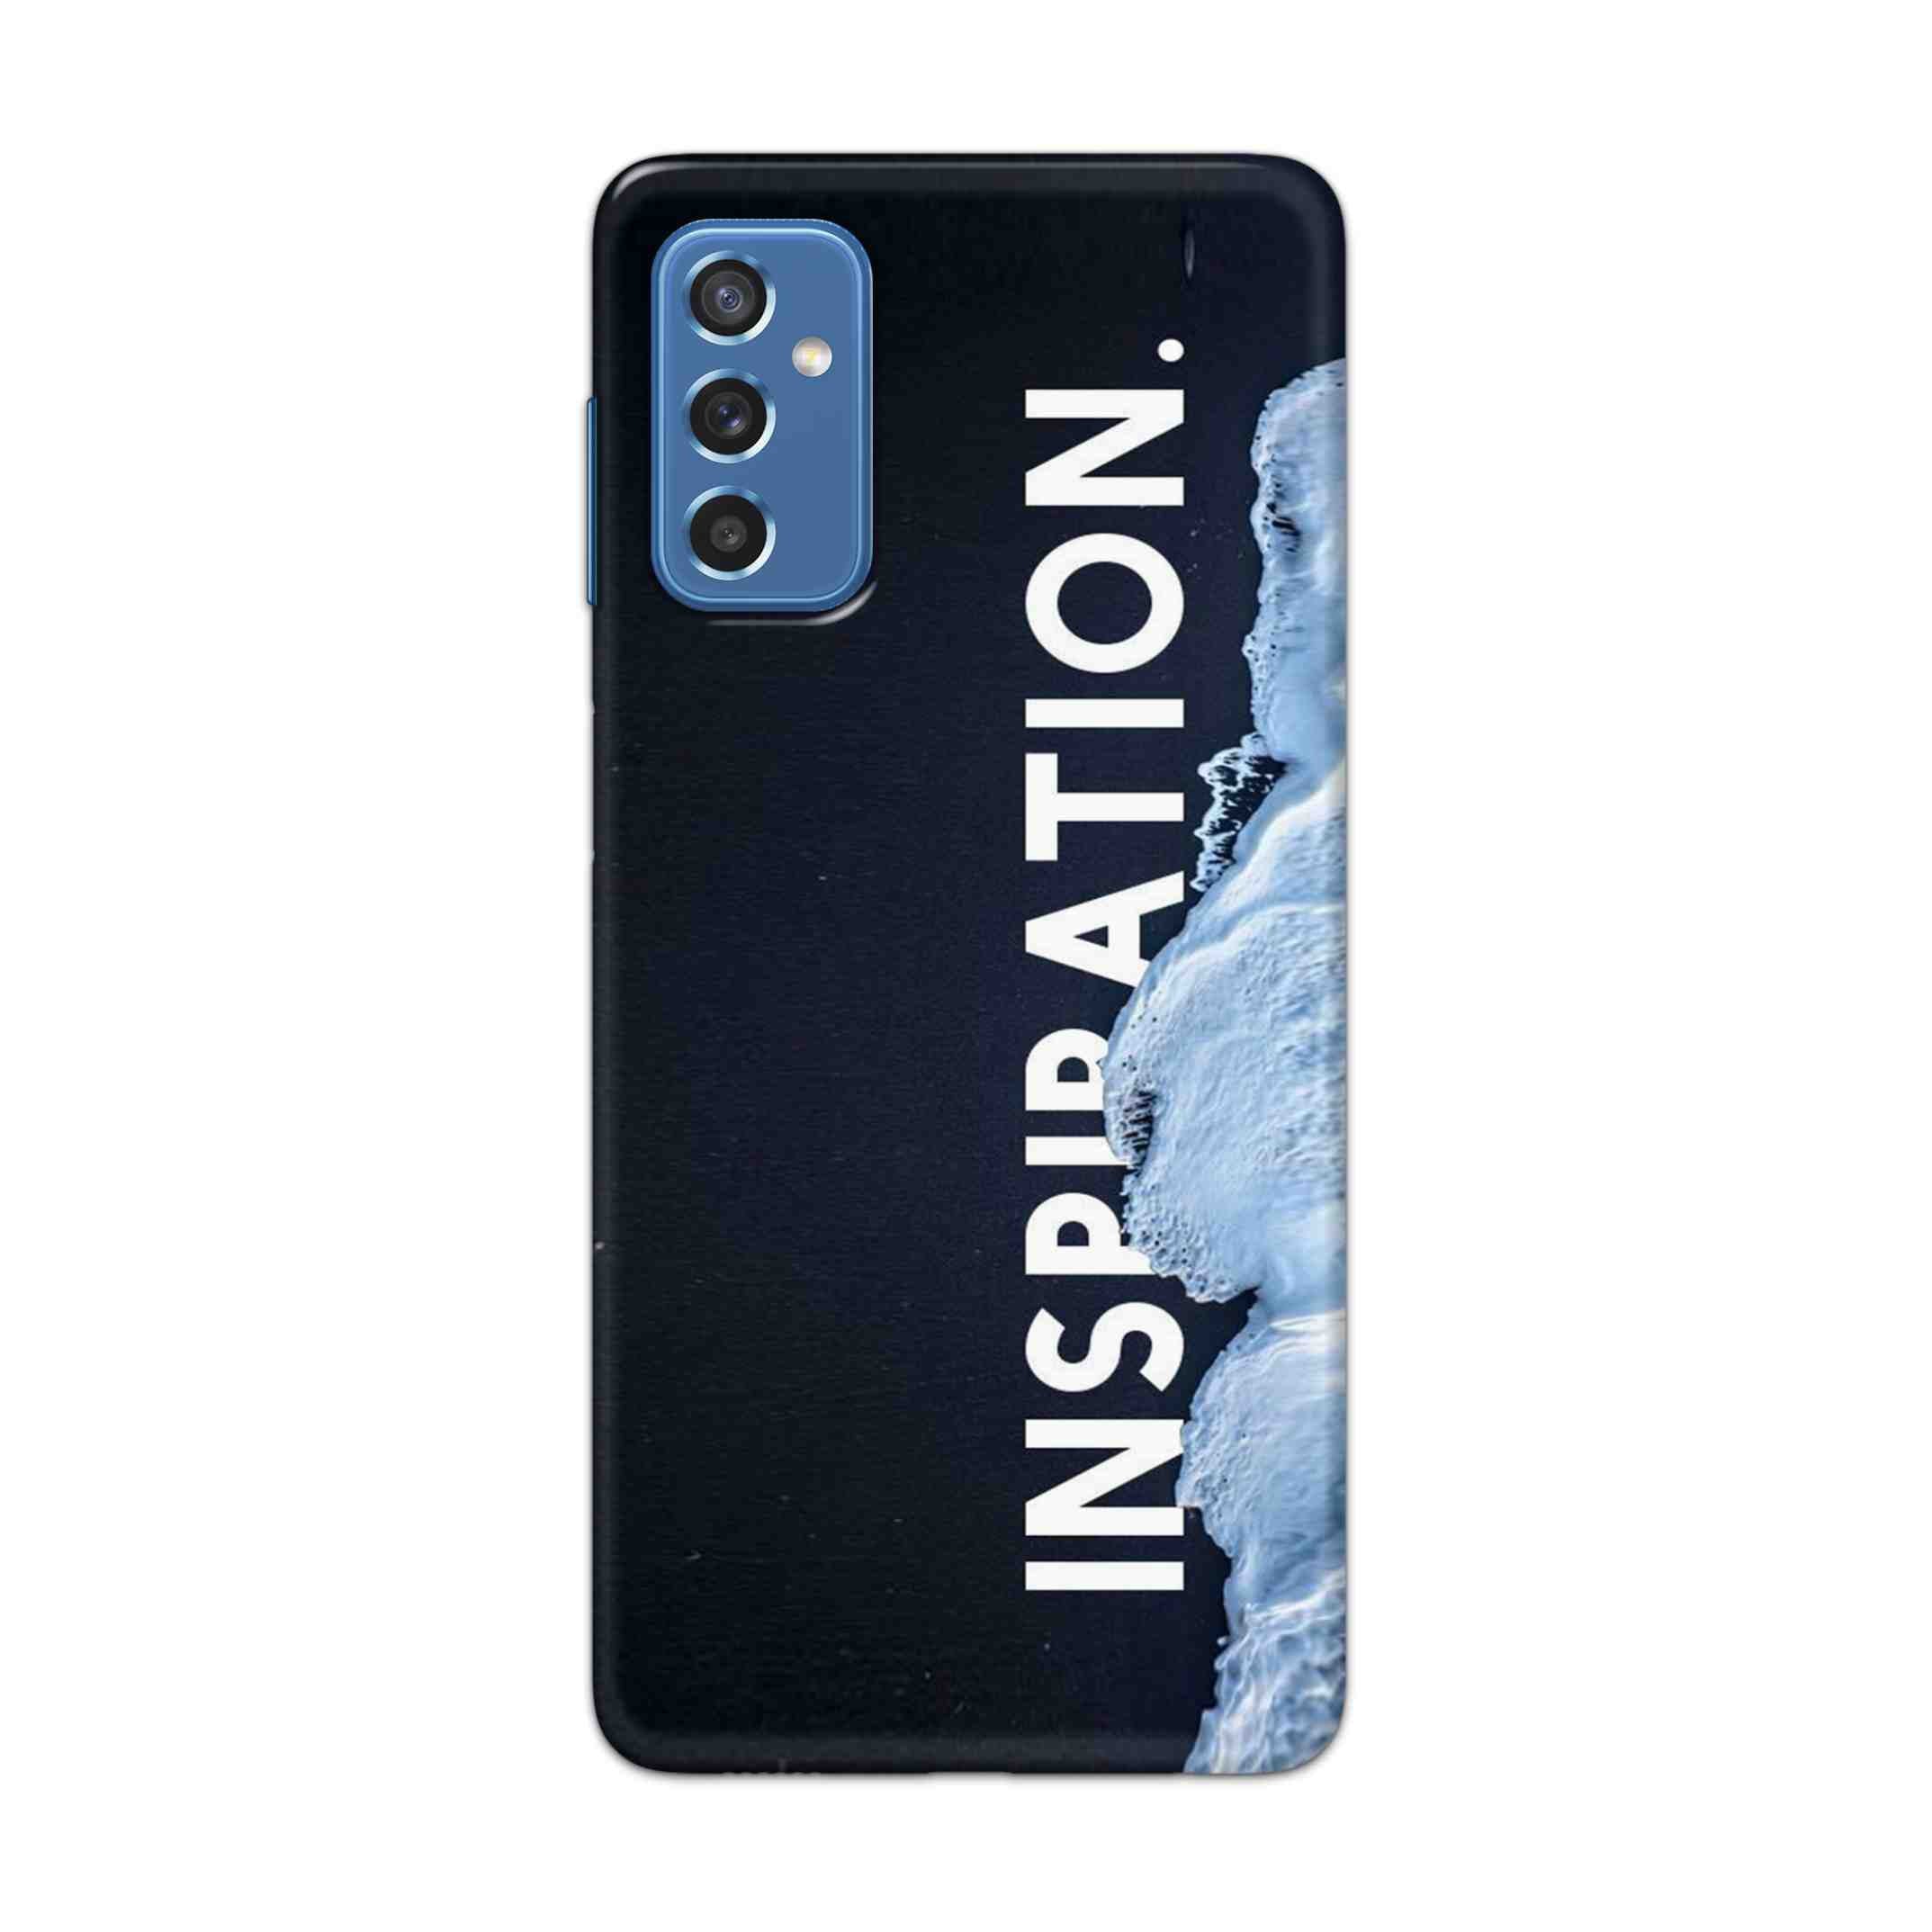 Buy Inspiration Hard Back Mobile Phone Case Cover For Samsung Galaxy M52 Online